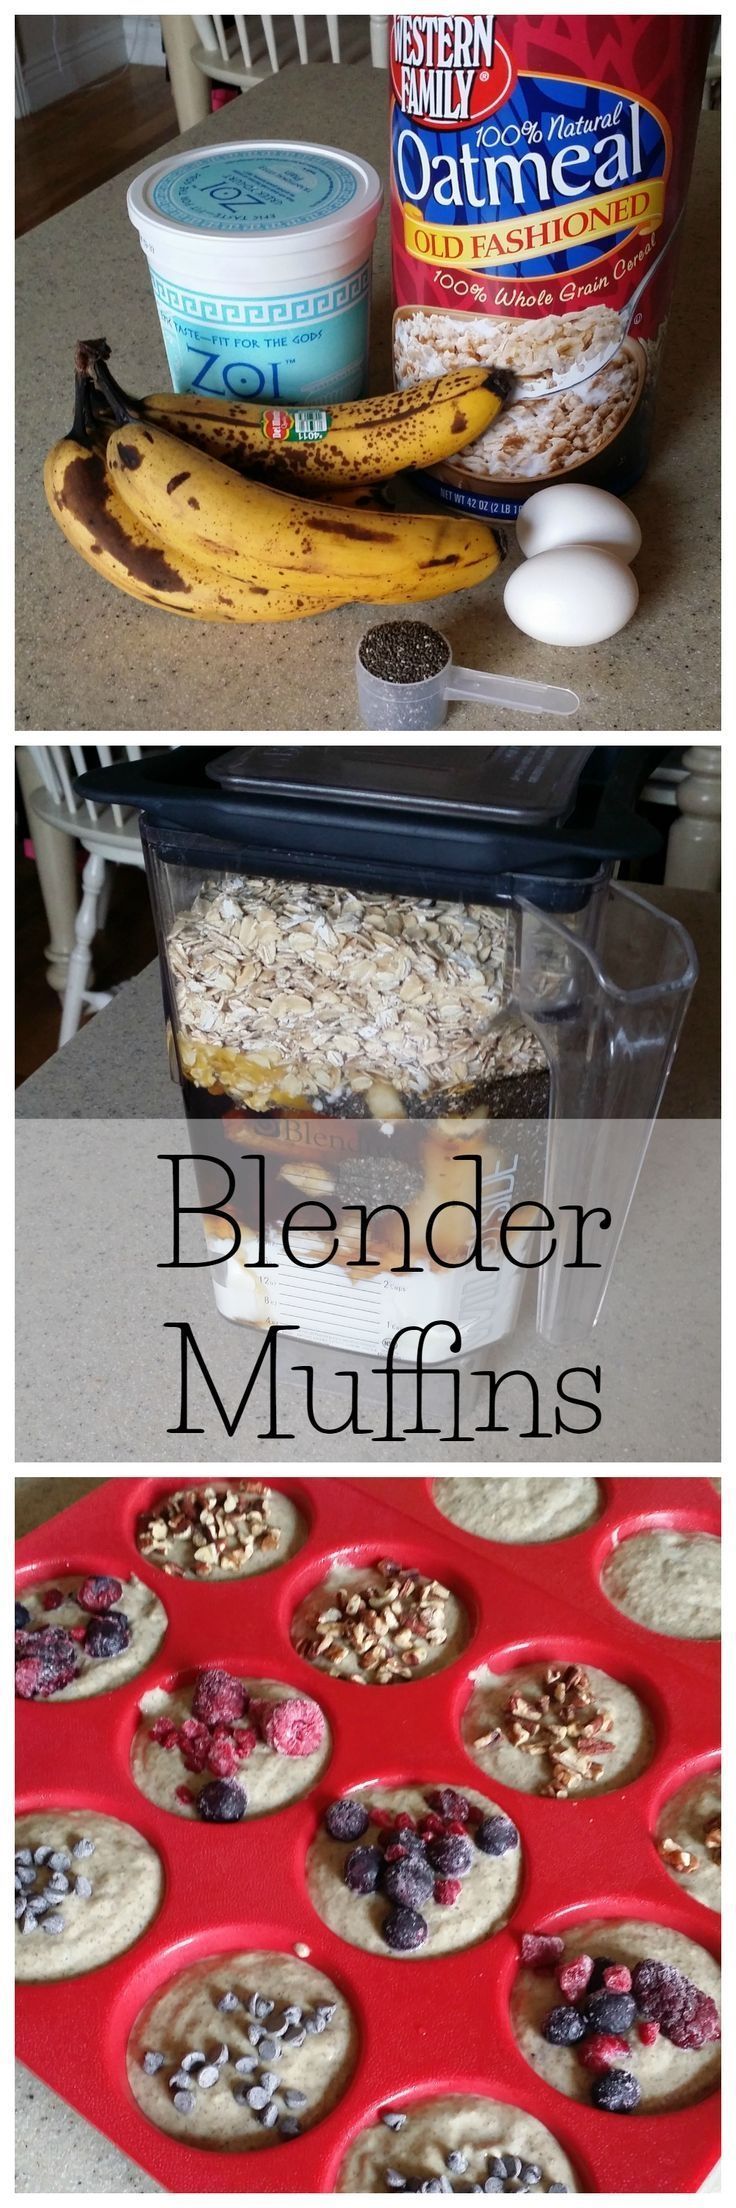 21 Day Fix approved Blender Muffins. Super easy recipe! #weightloss